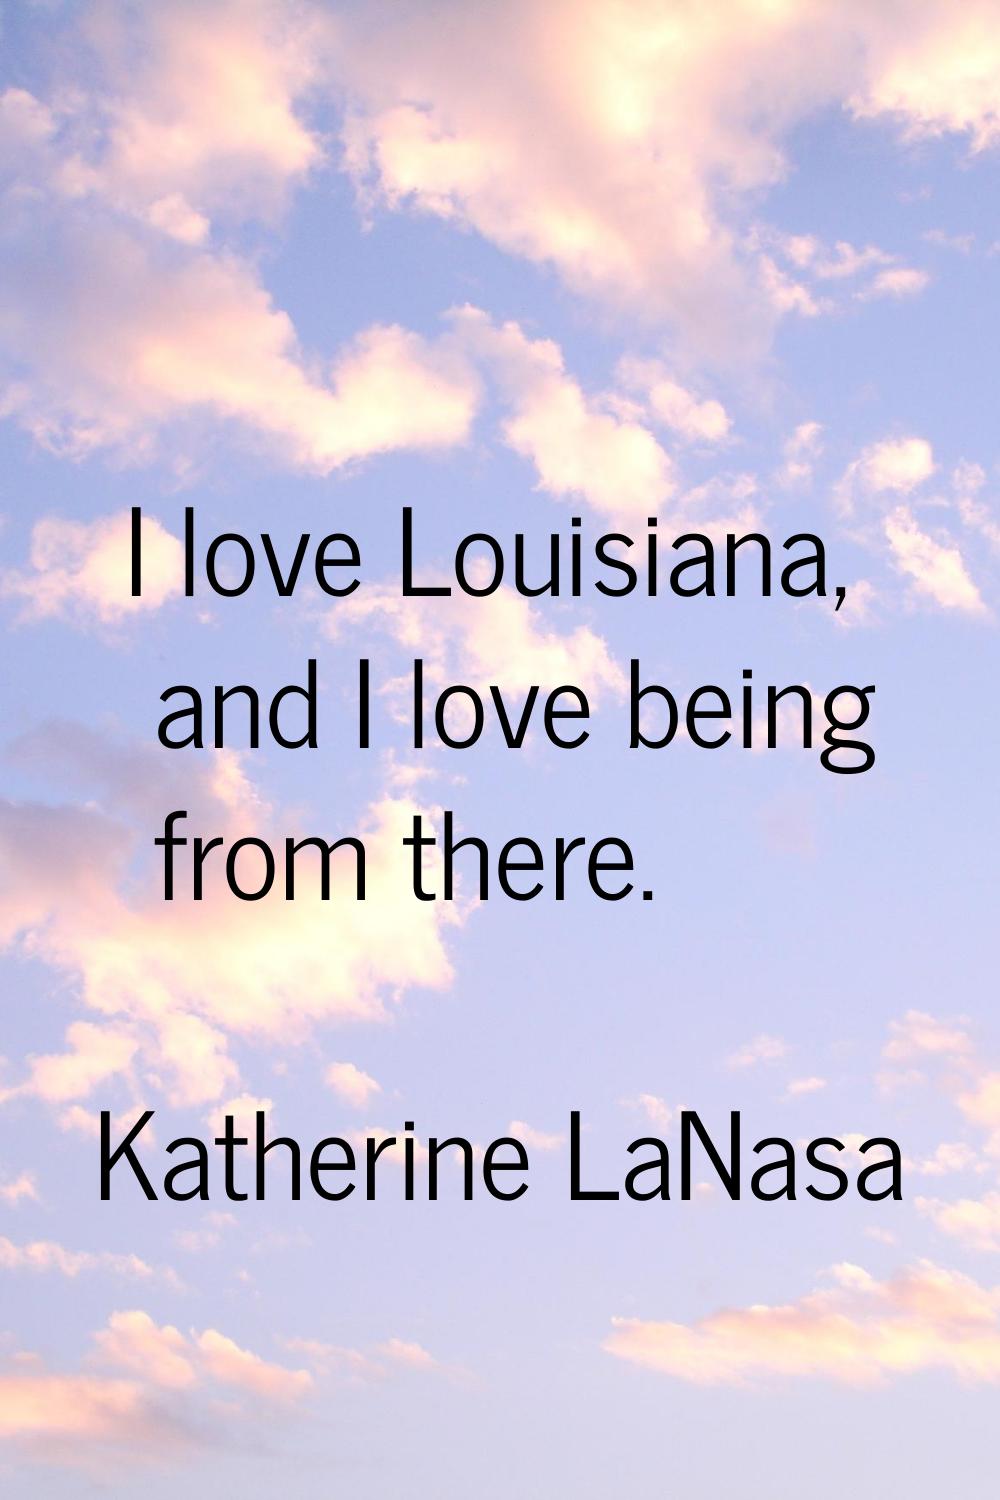 I love Louisiana, and I love being from there.